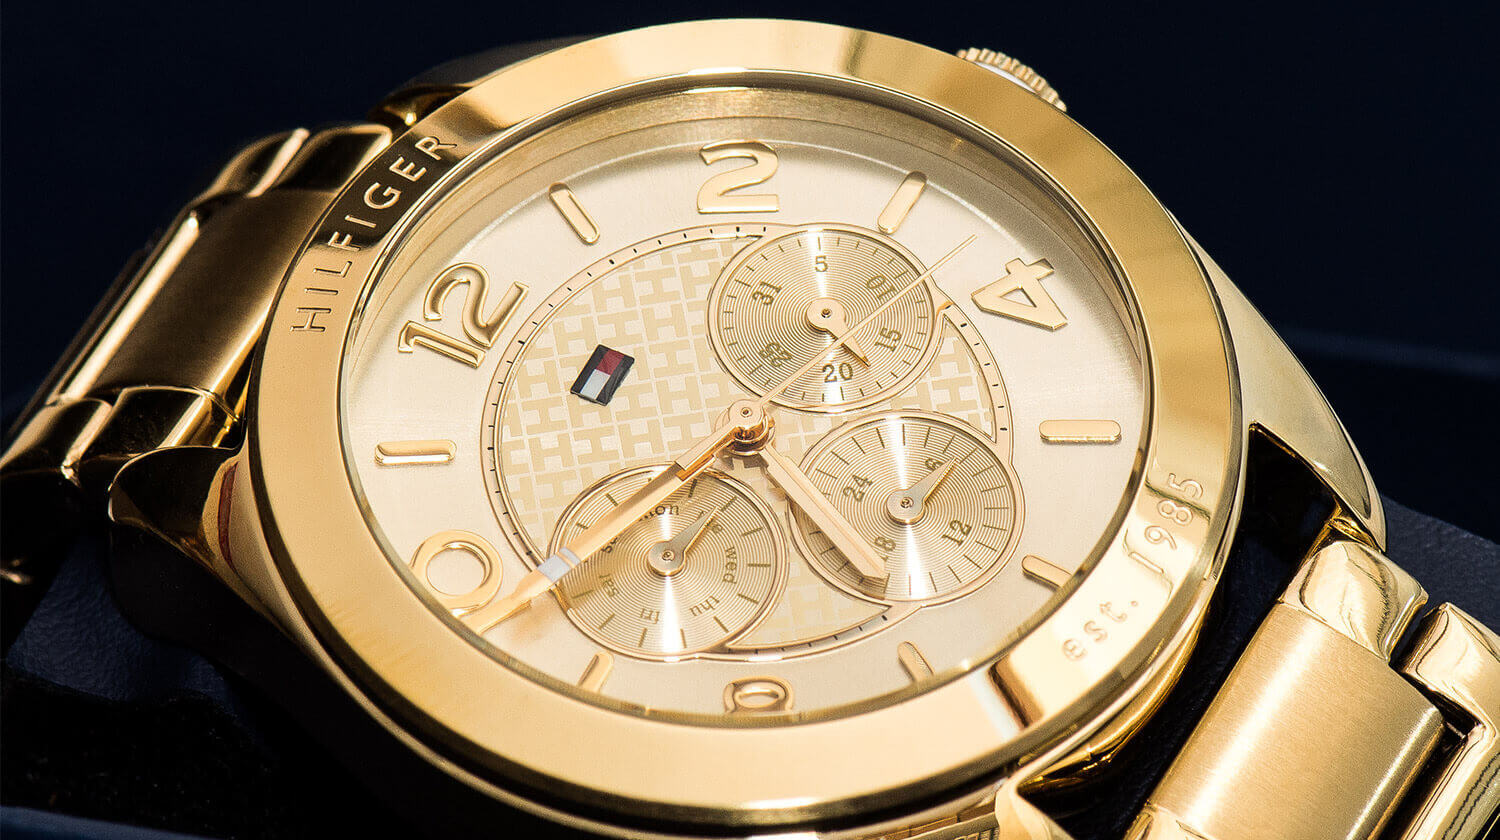 Are Tommy Hilfiger Watches Good Quality